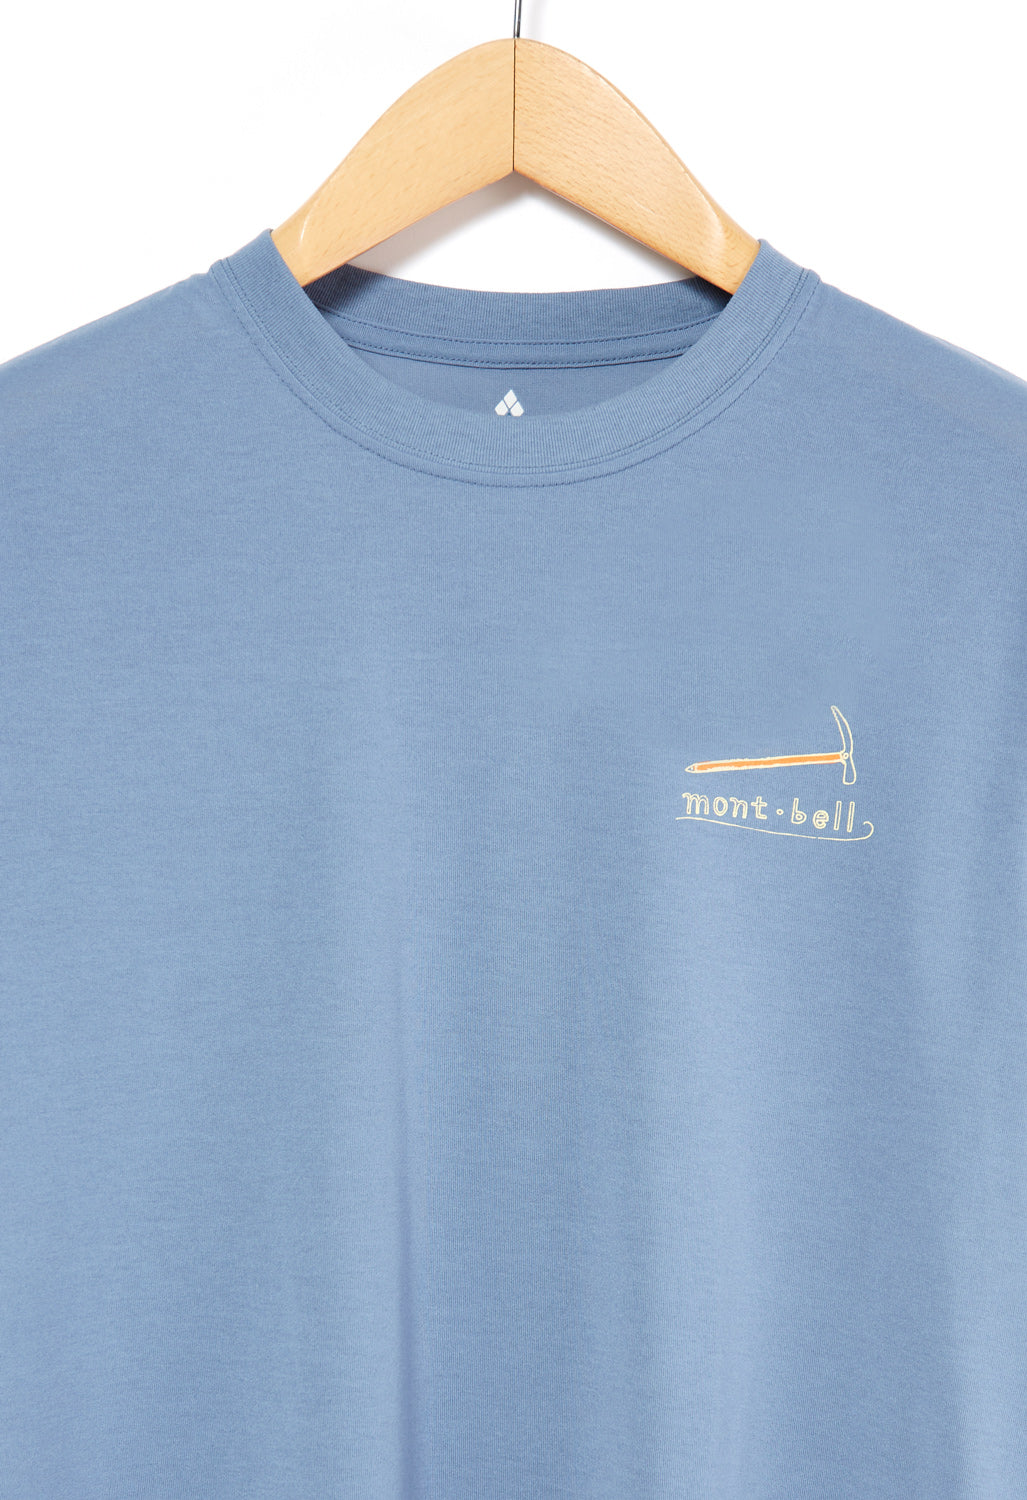 Montbell Wickron Mountain Gear T-Shirt - Blue